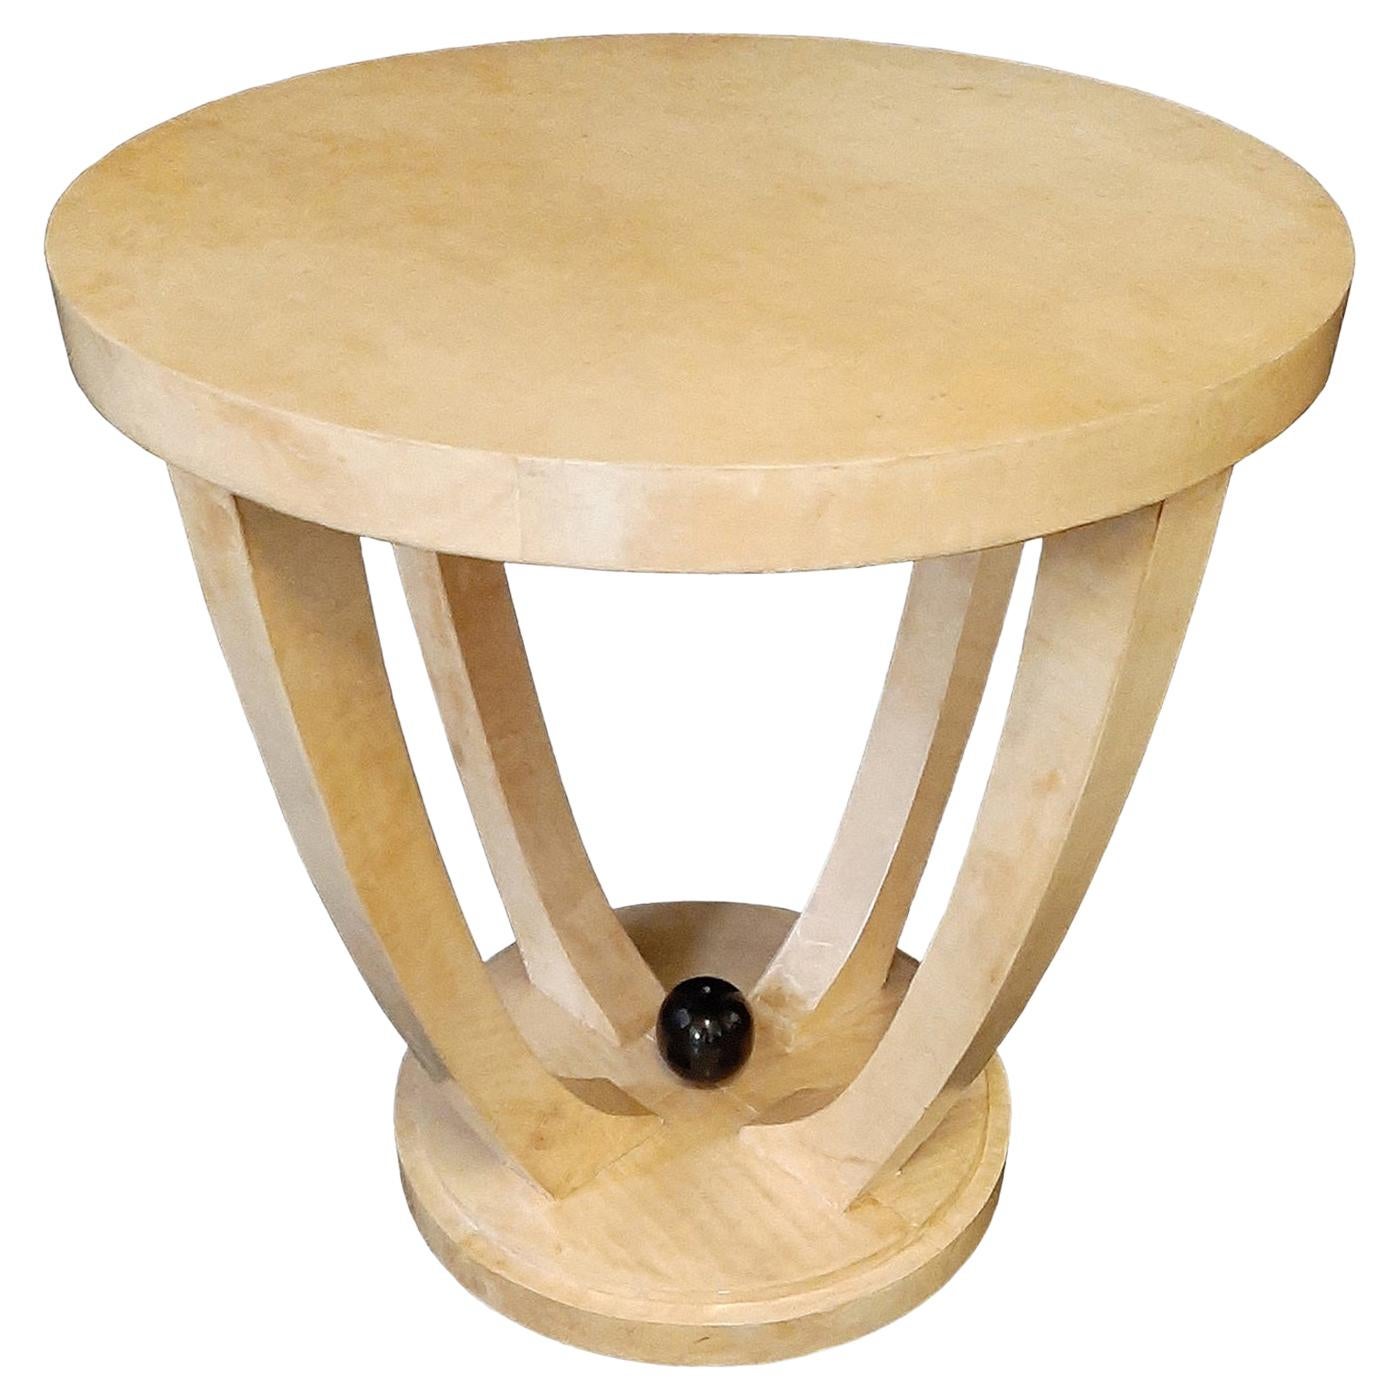 PLM-0087 Ivory Parchment Round Side Table